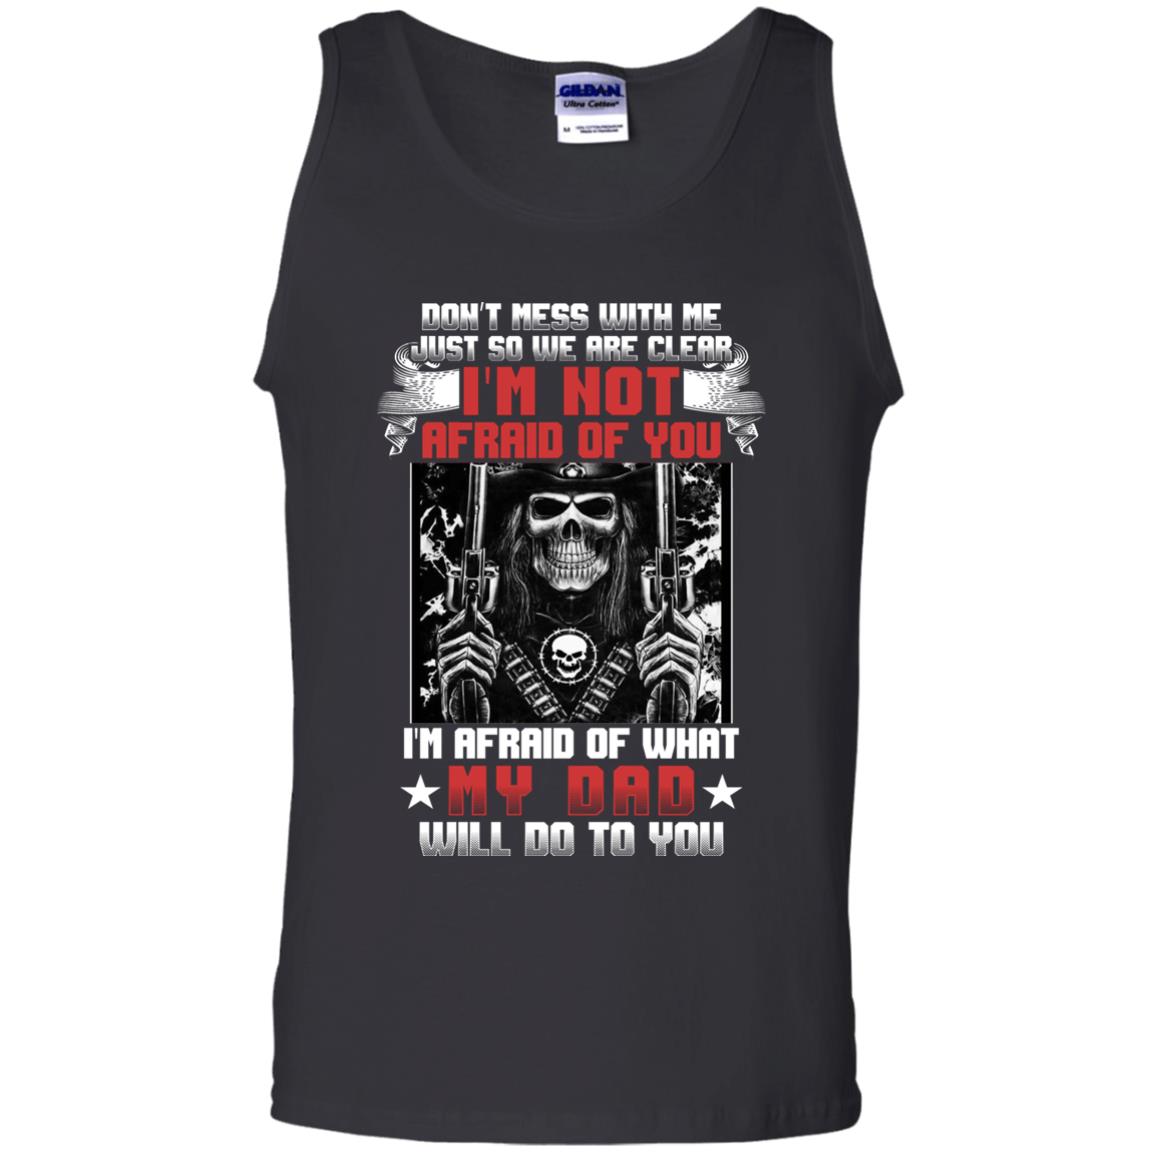 Don_t Mess With Me Just So We Are Clear I_m Not Afraid Of You I_m Afraid Of My Dad Will Do To YouG220 Gildan 100% Cotton Tank Top